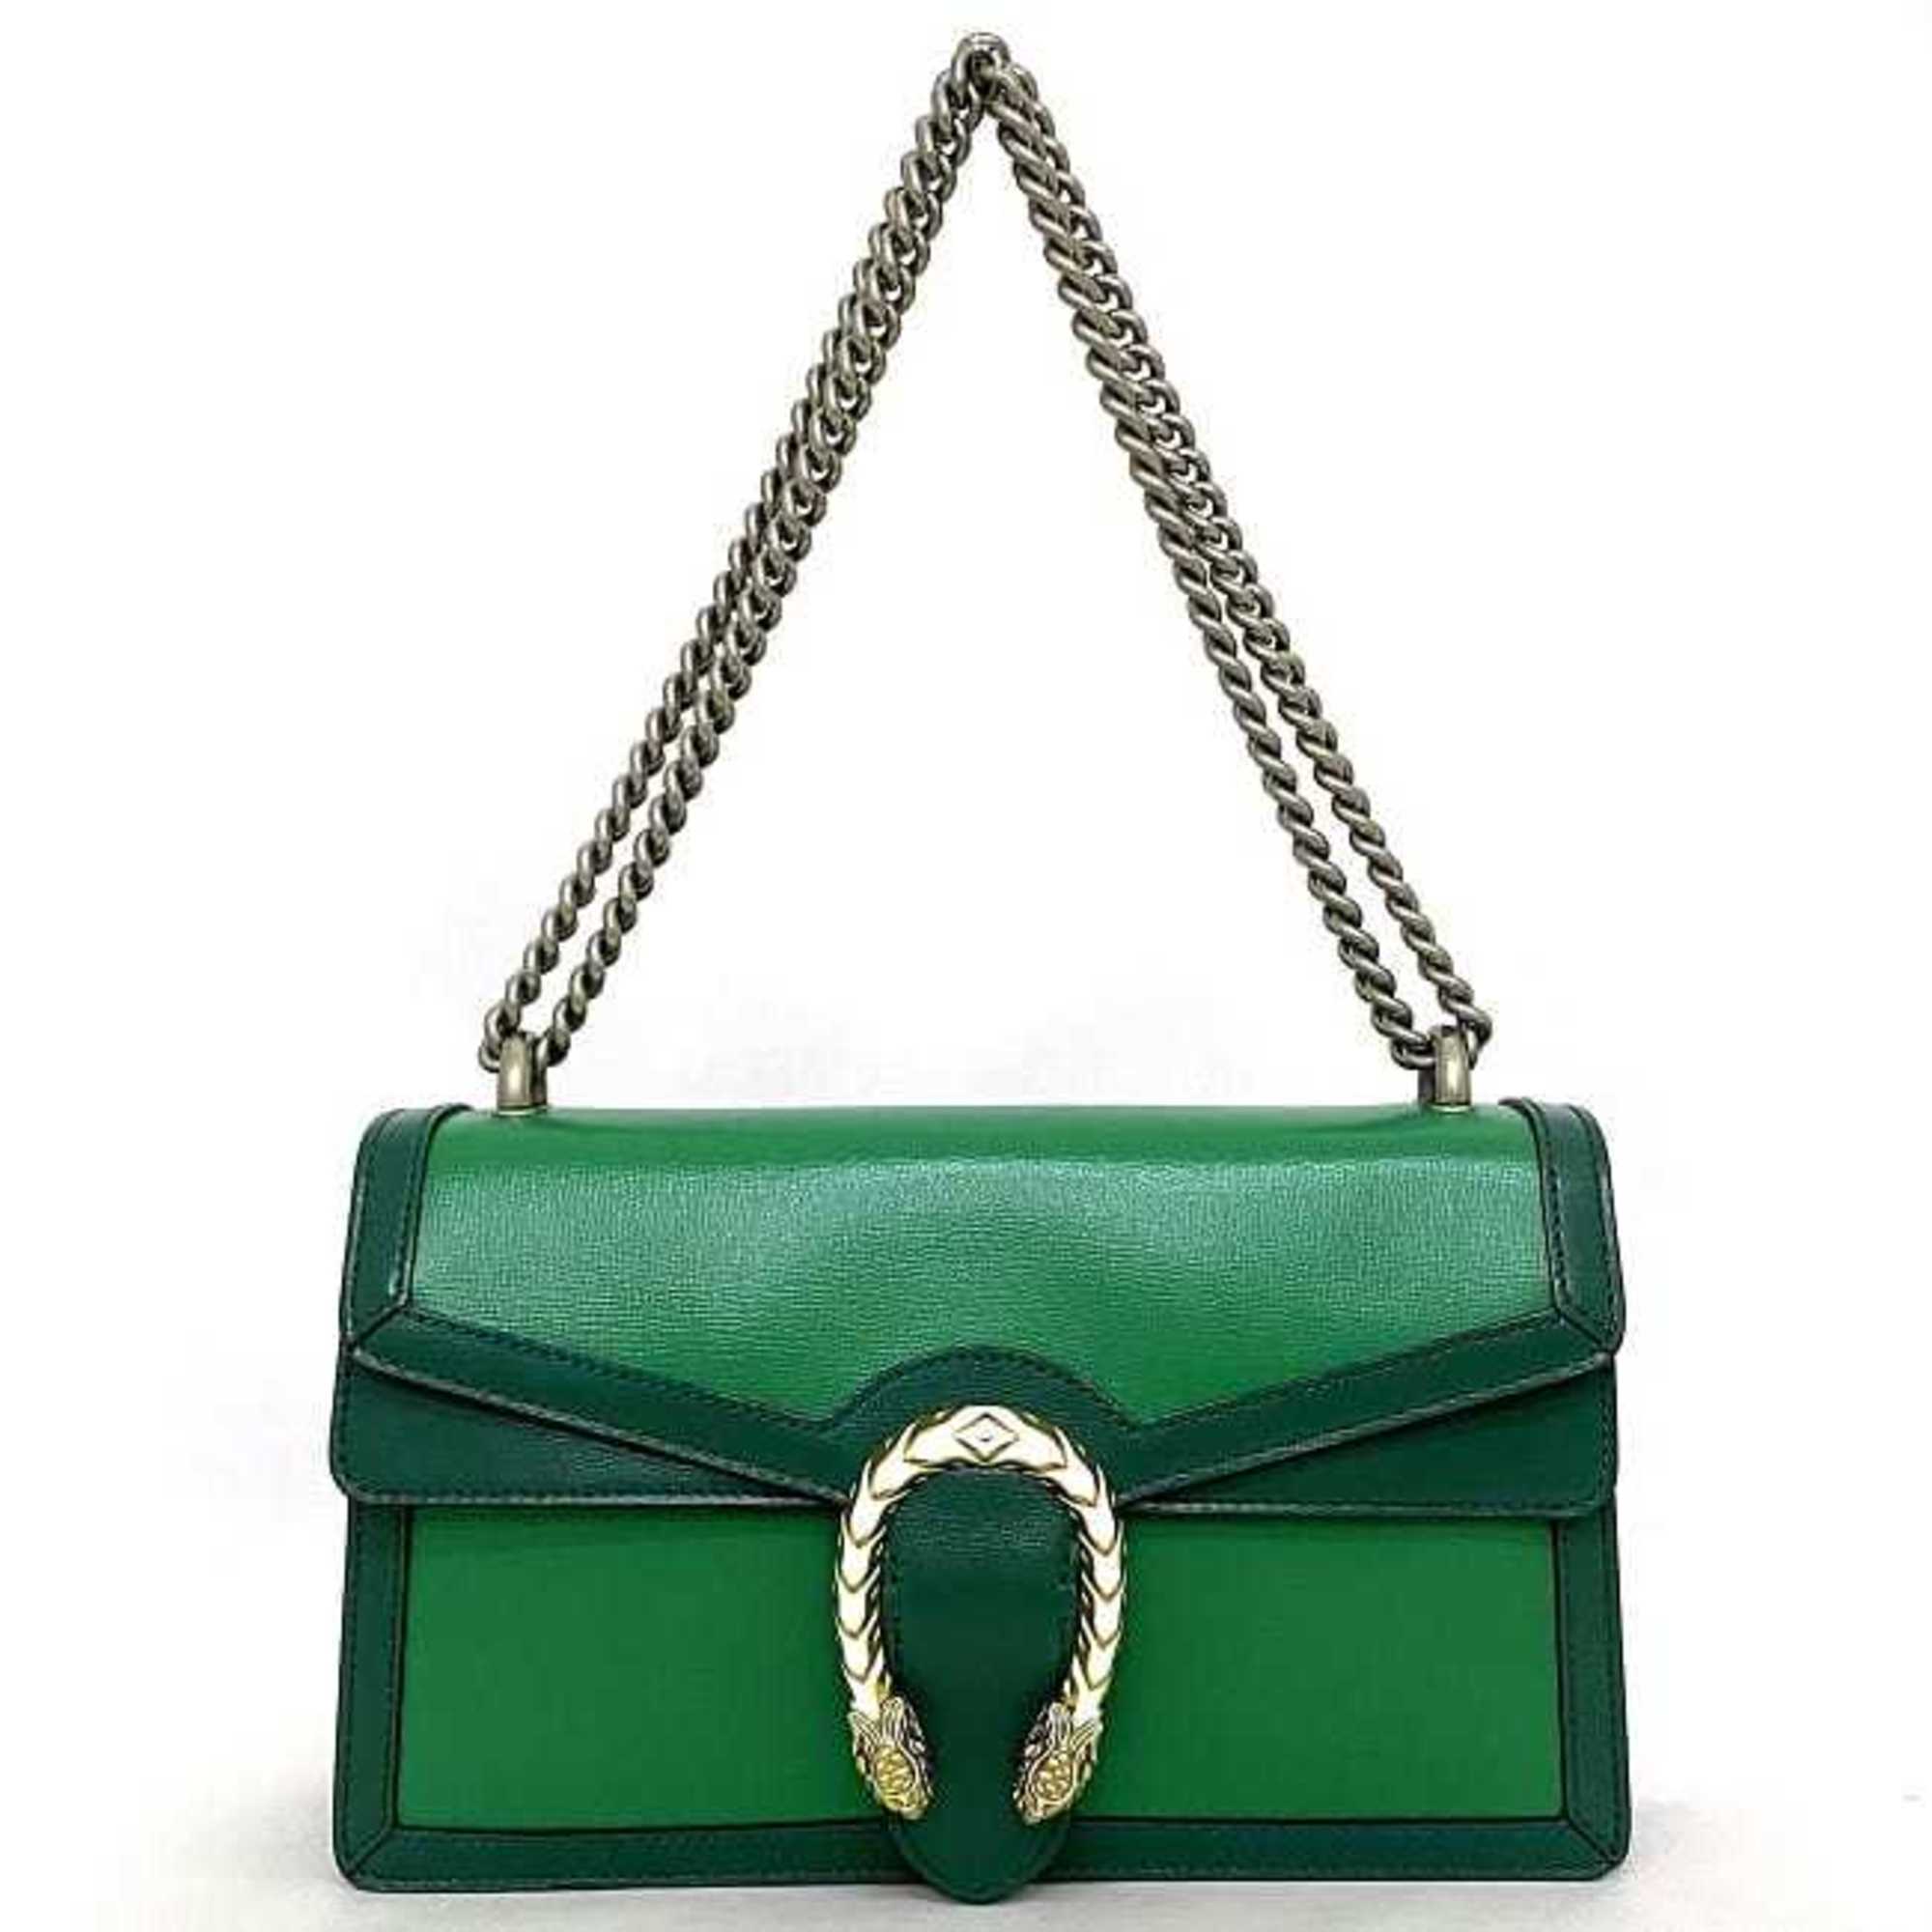 Gucci Dionysus Chain Shoulder Bag Green White Gold Silver 493930 Leather GUCCI Snake Flap Women's